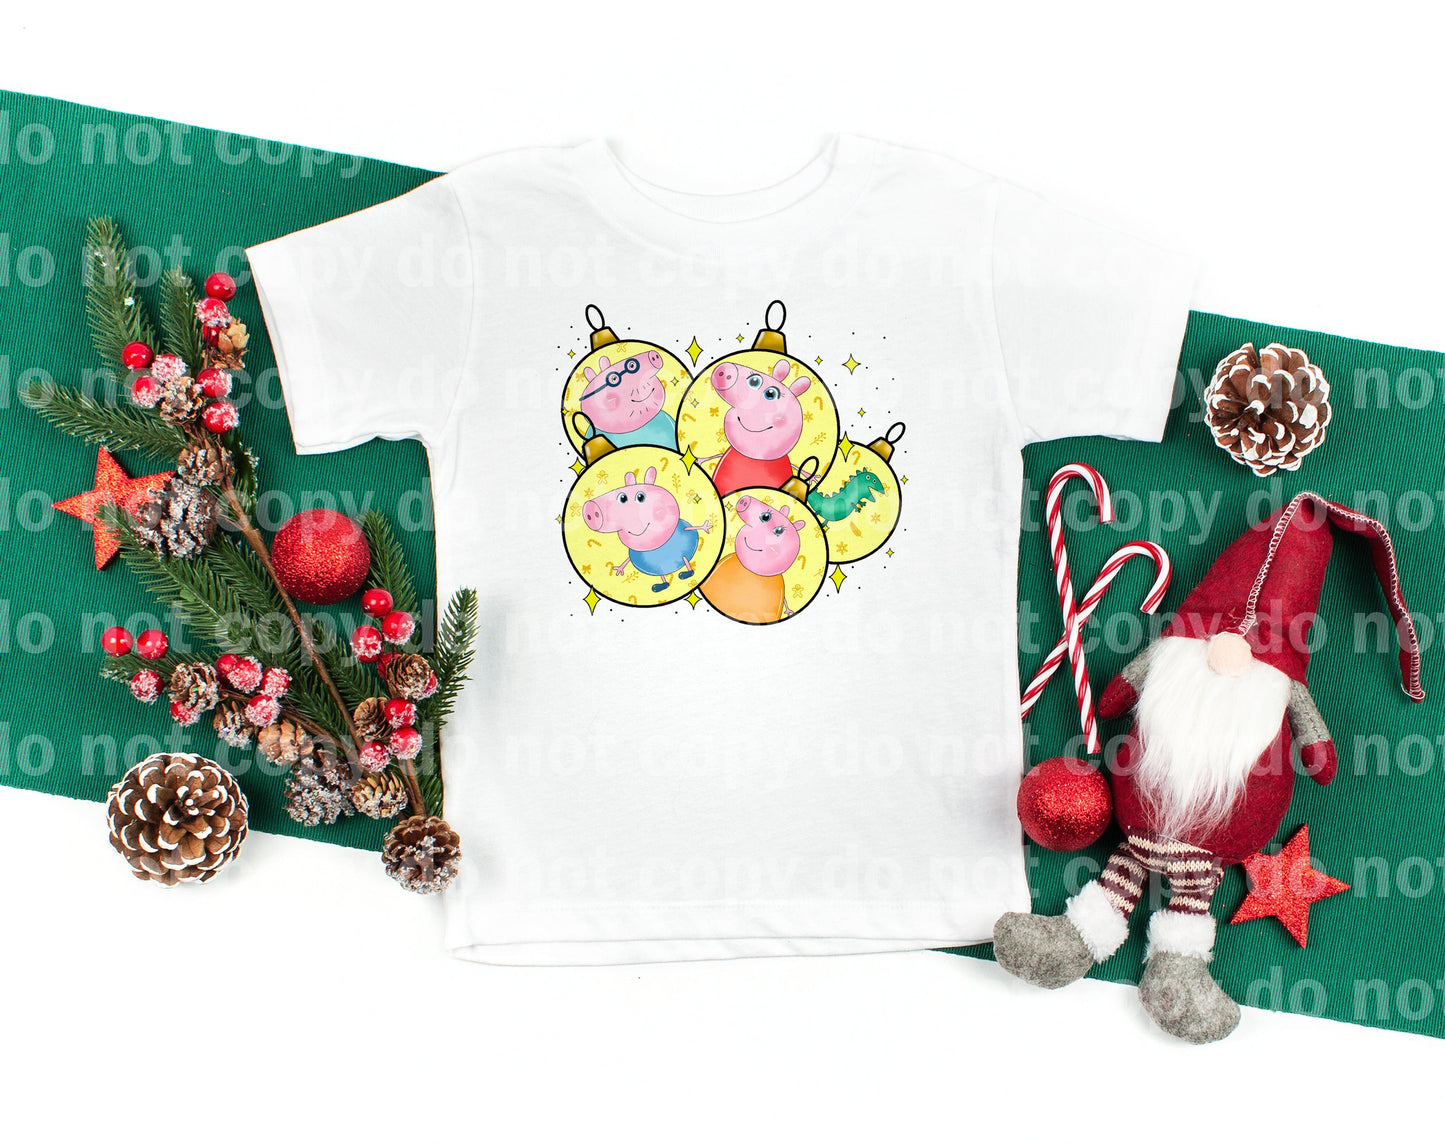 Baby Pig Christmas Ornament Balls with Optional Sleeve Design Dream Print or Sublimation Print